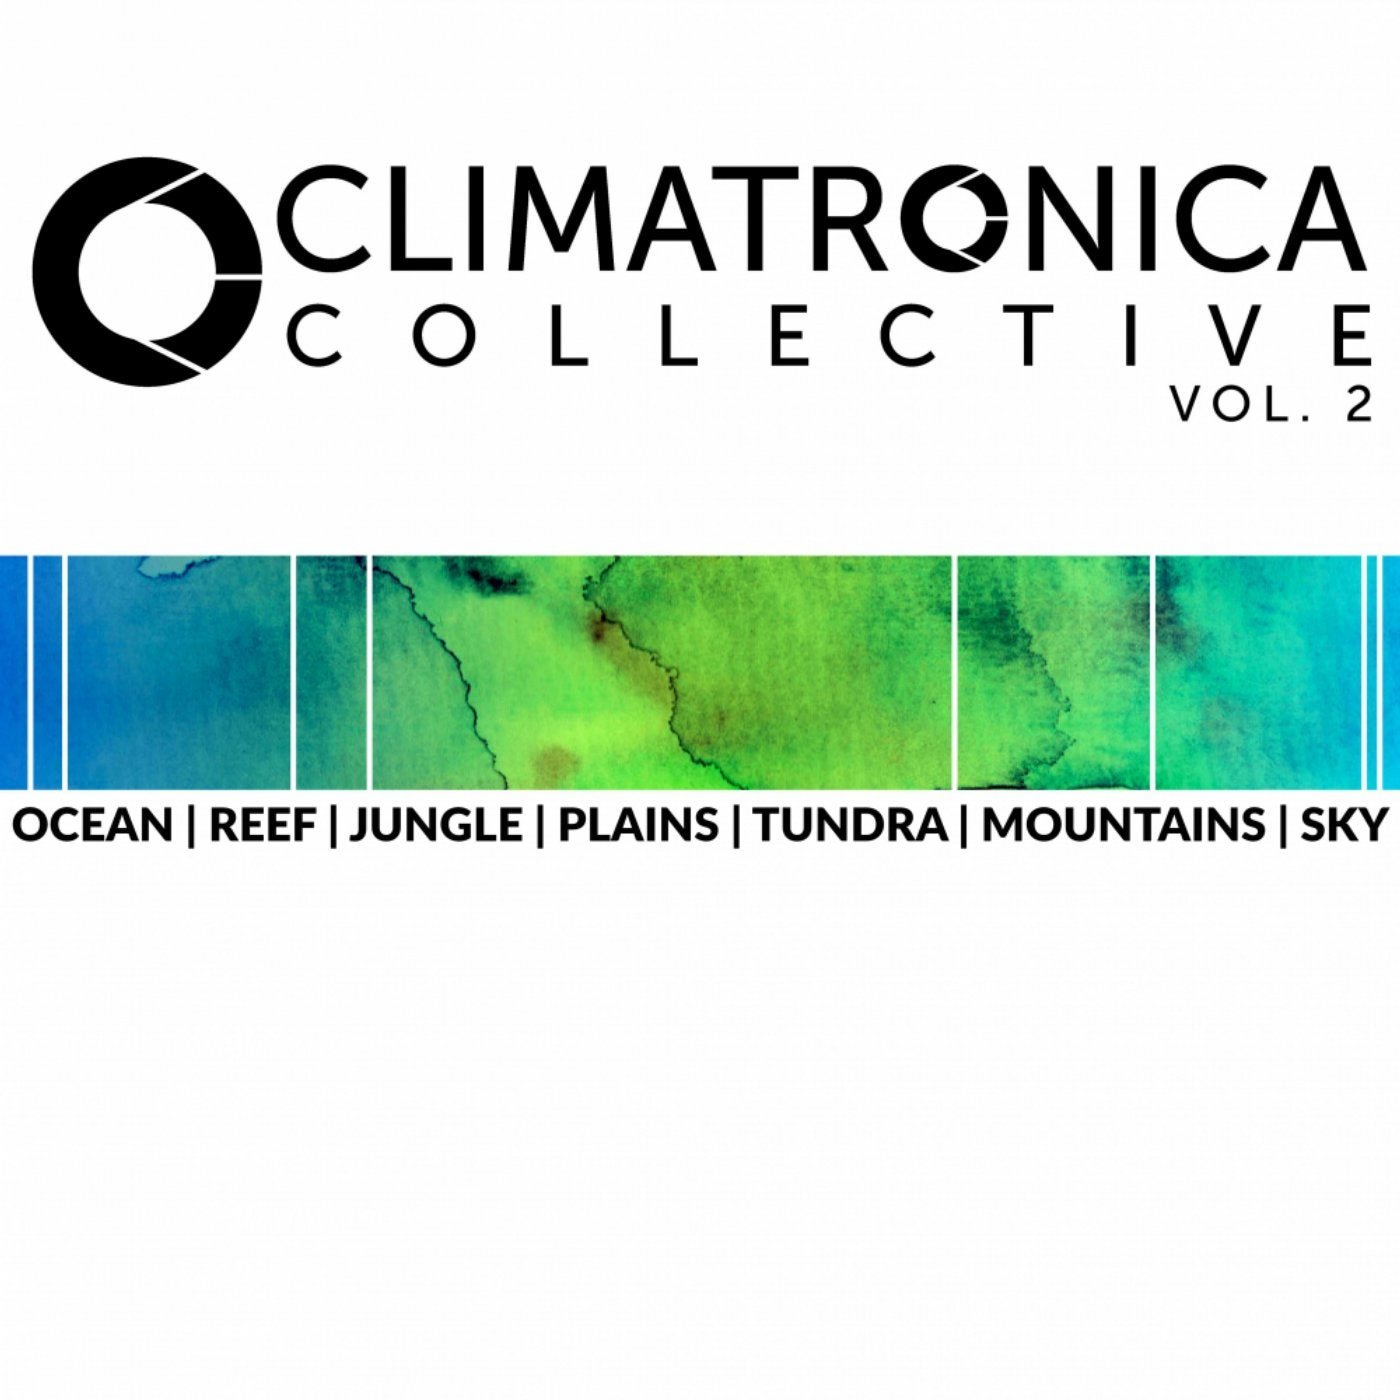 The Climatronica Collective Vol. 2